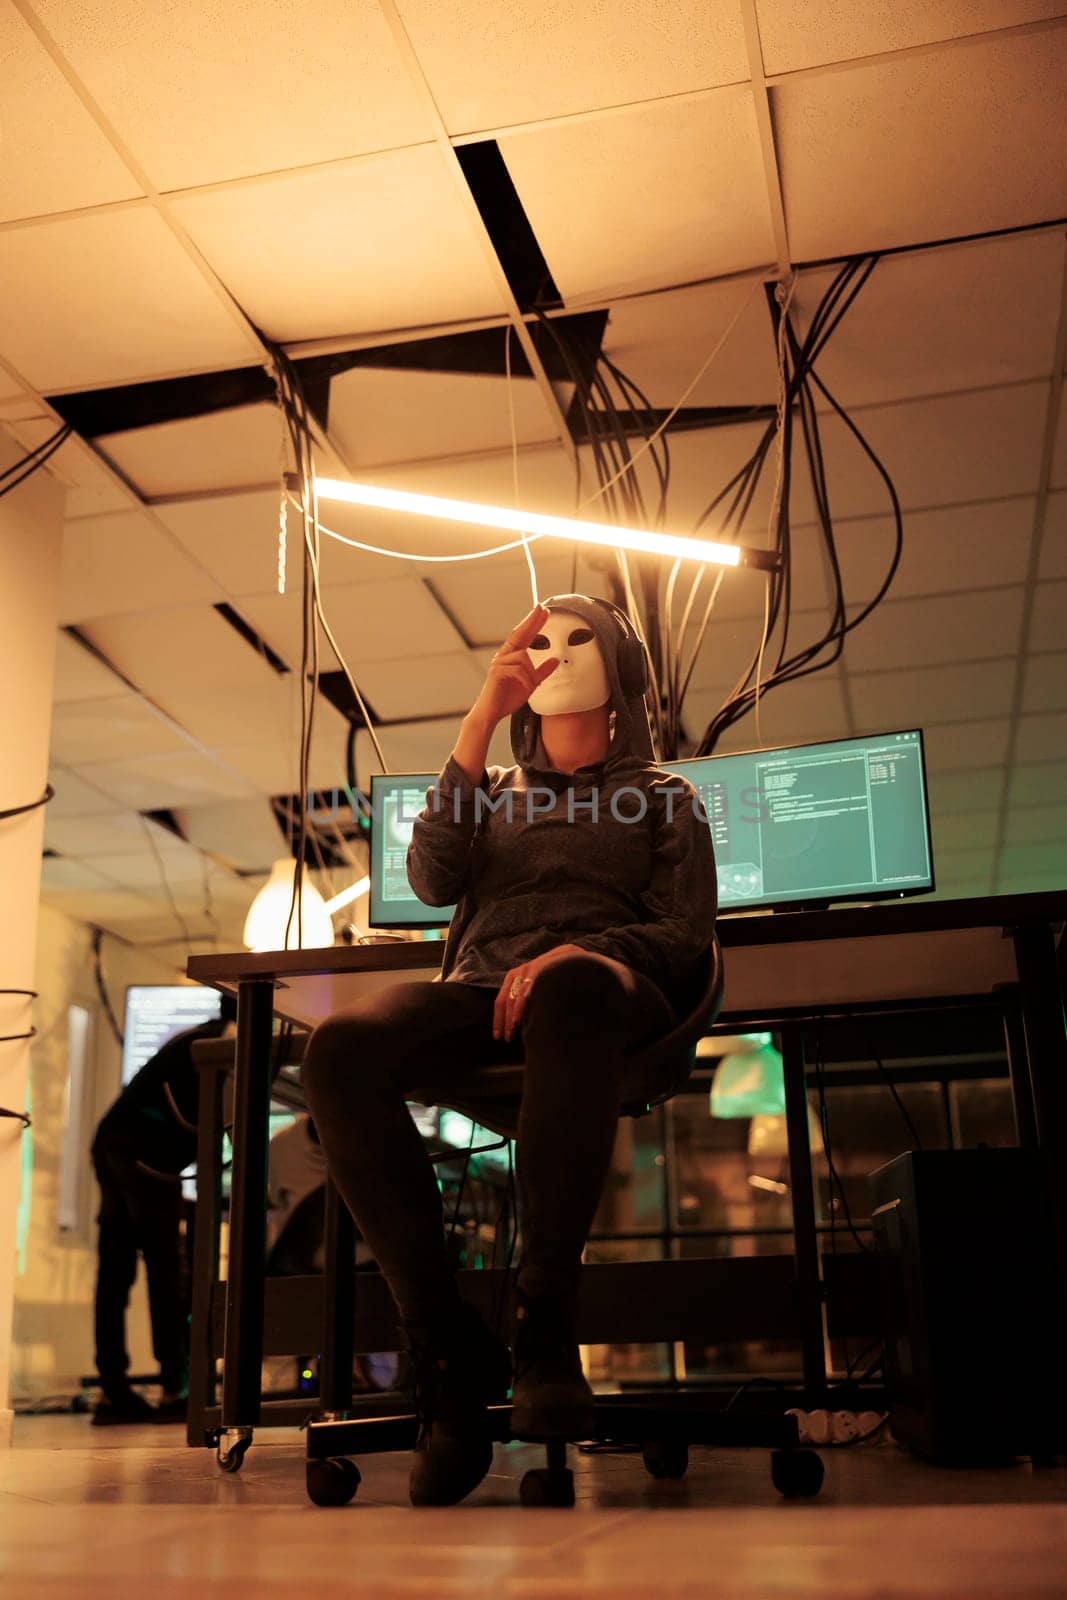 Spy with anonymous mask analyzing hologram to break into system by DCStudio